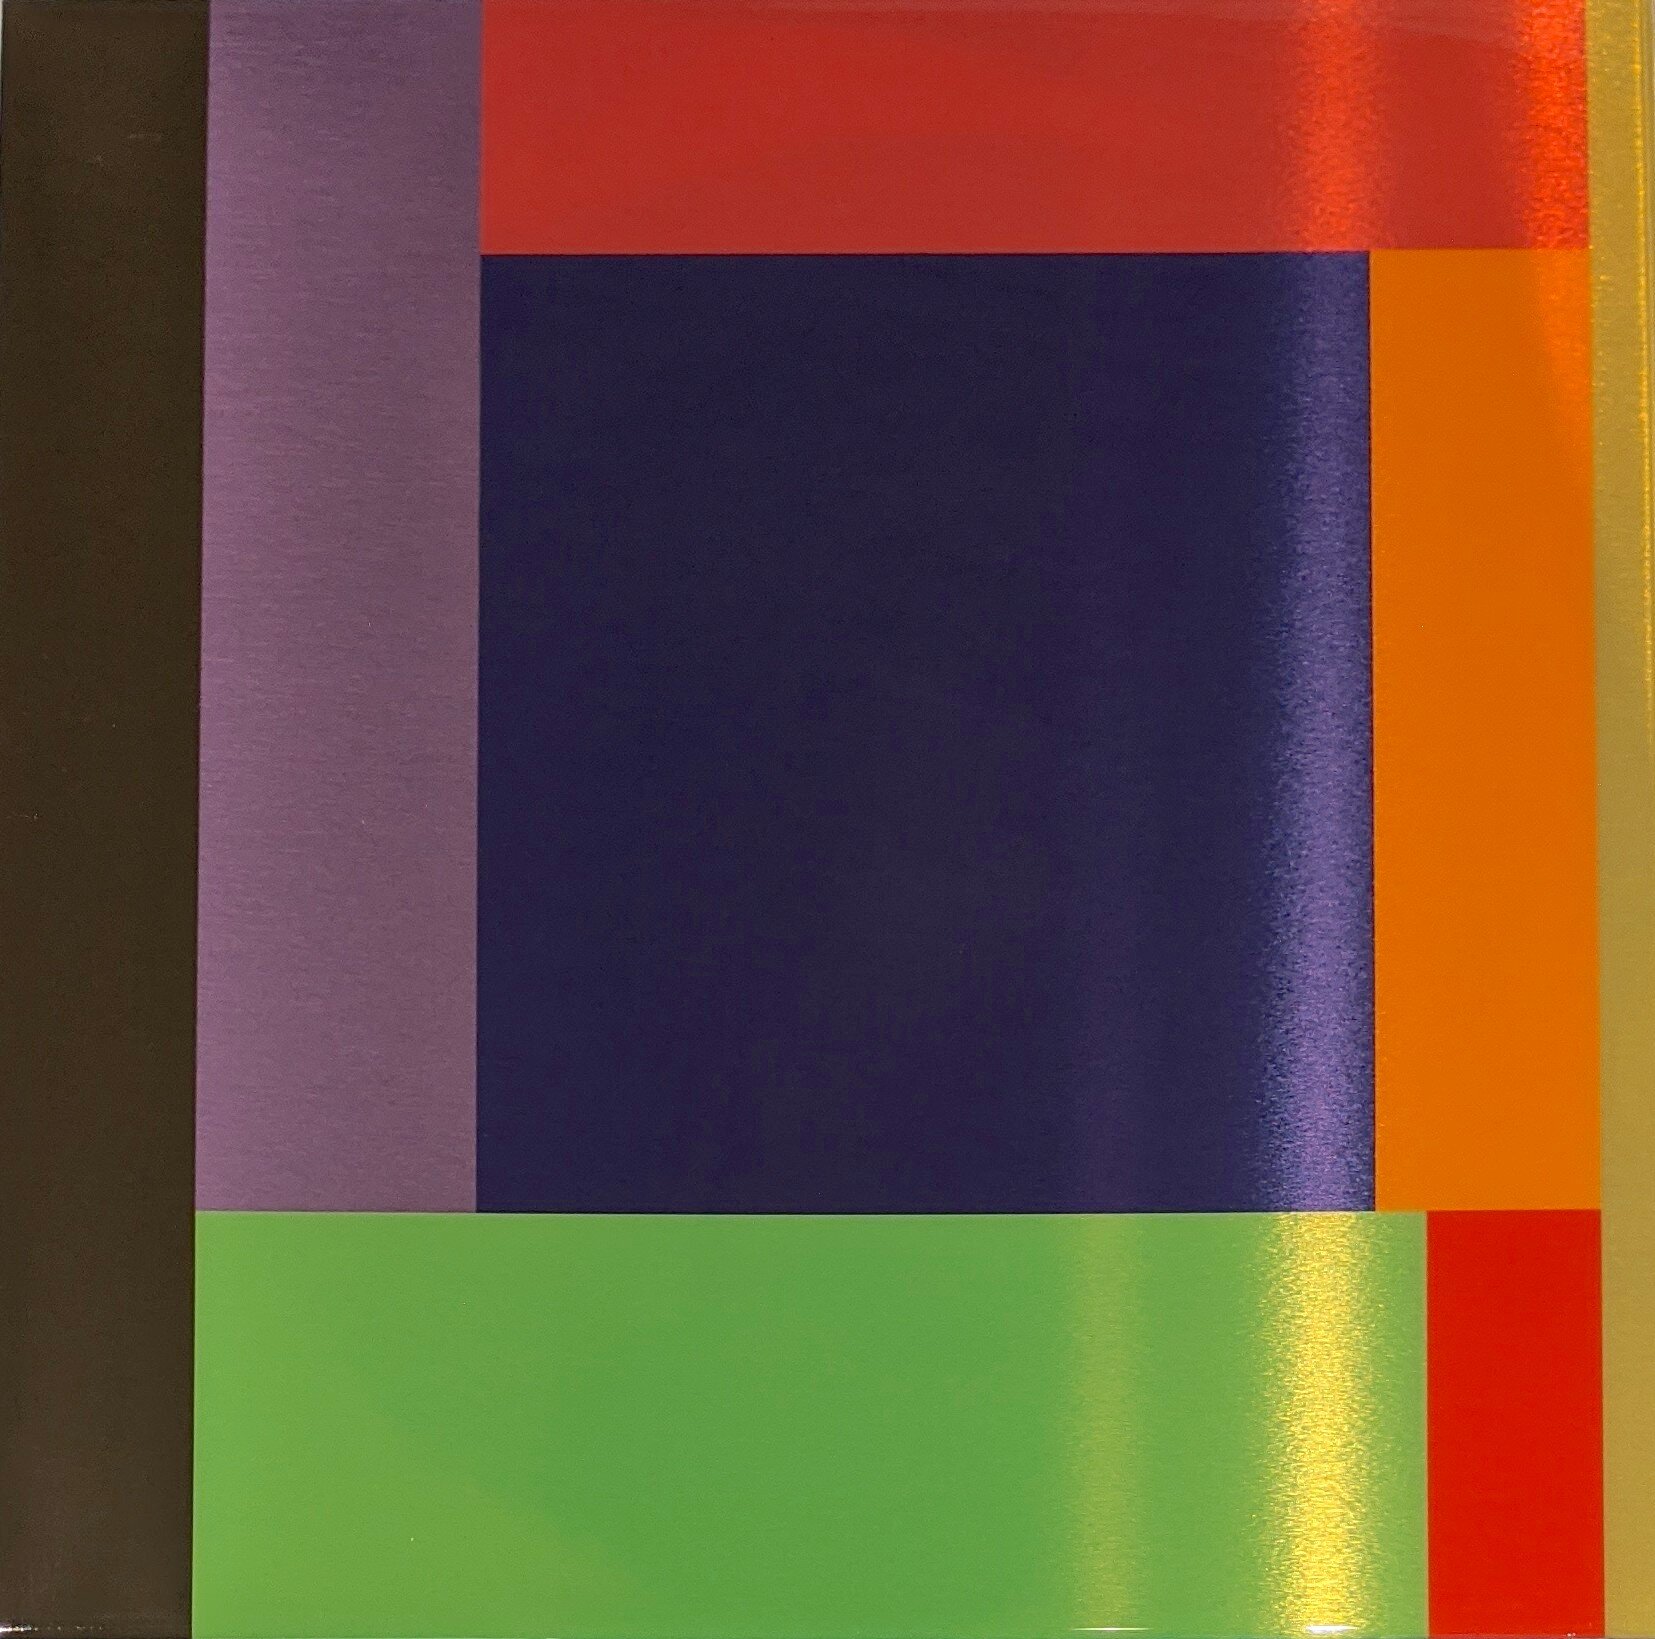  Hymn to Color #17 on aluminum by Michel Muylle 